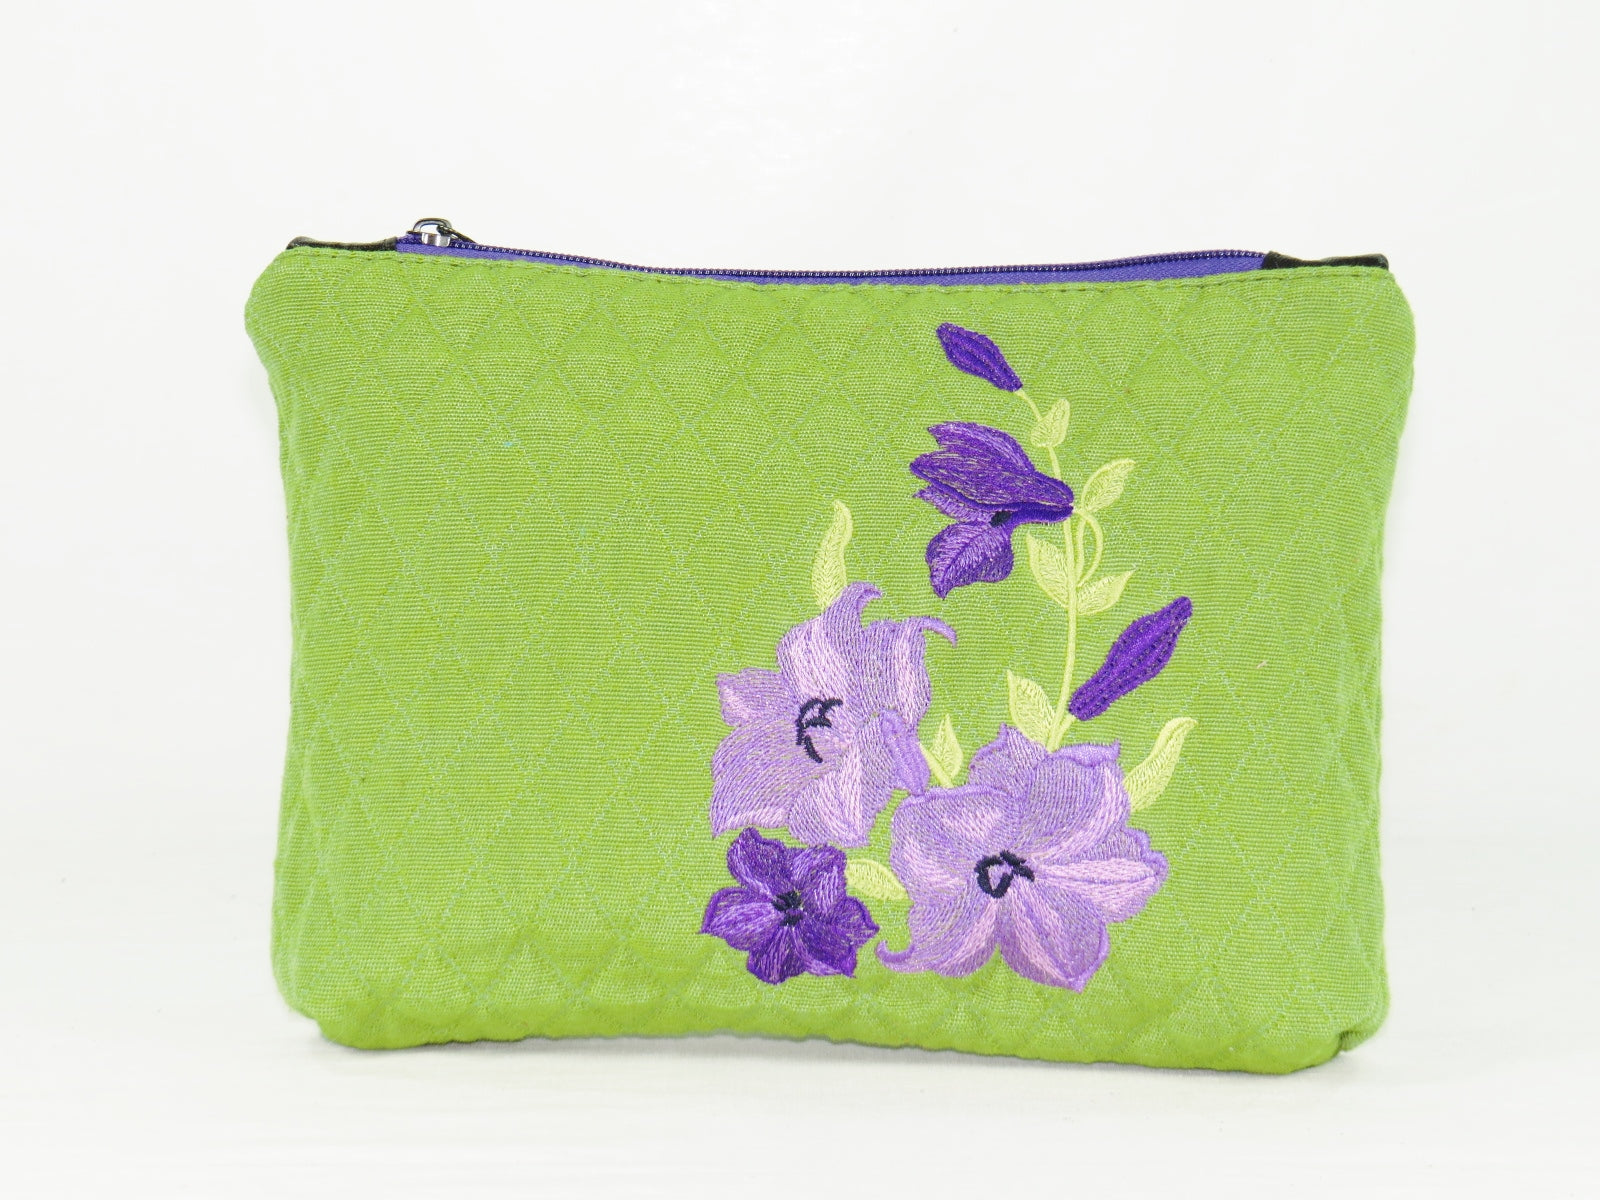 Embroidered Purple Flowers on Green Zipper Pouch